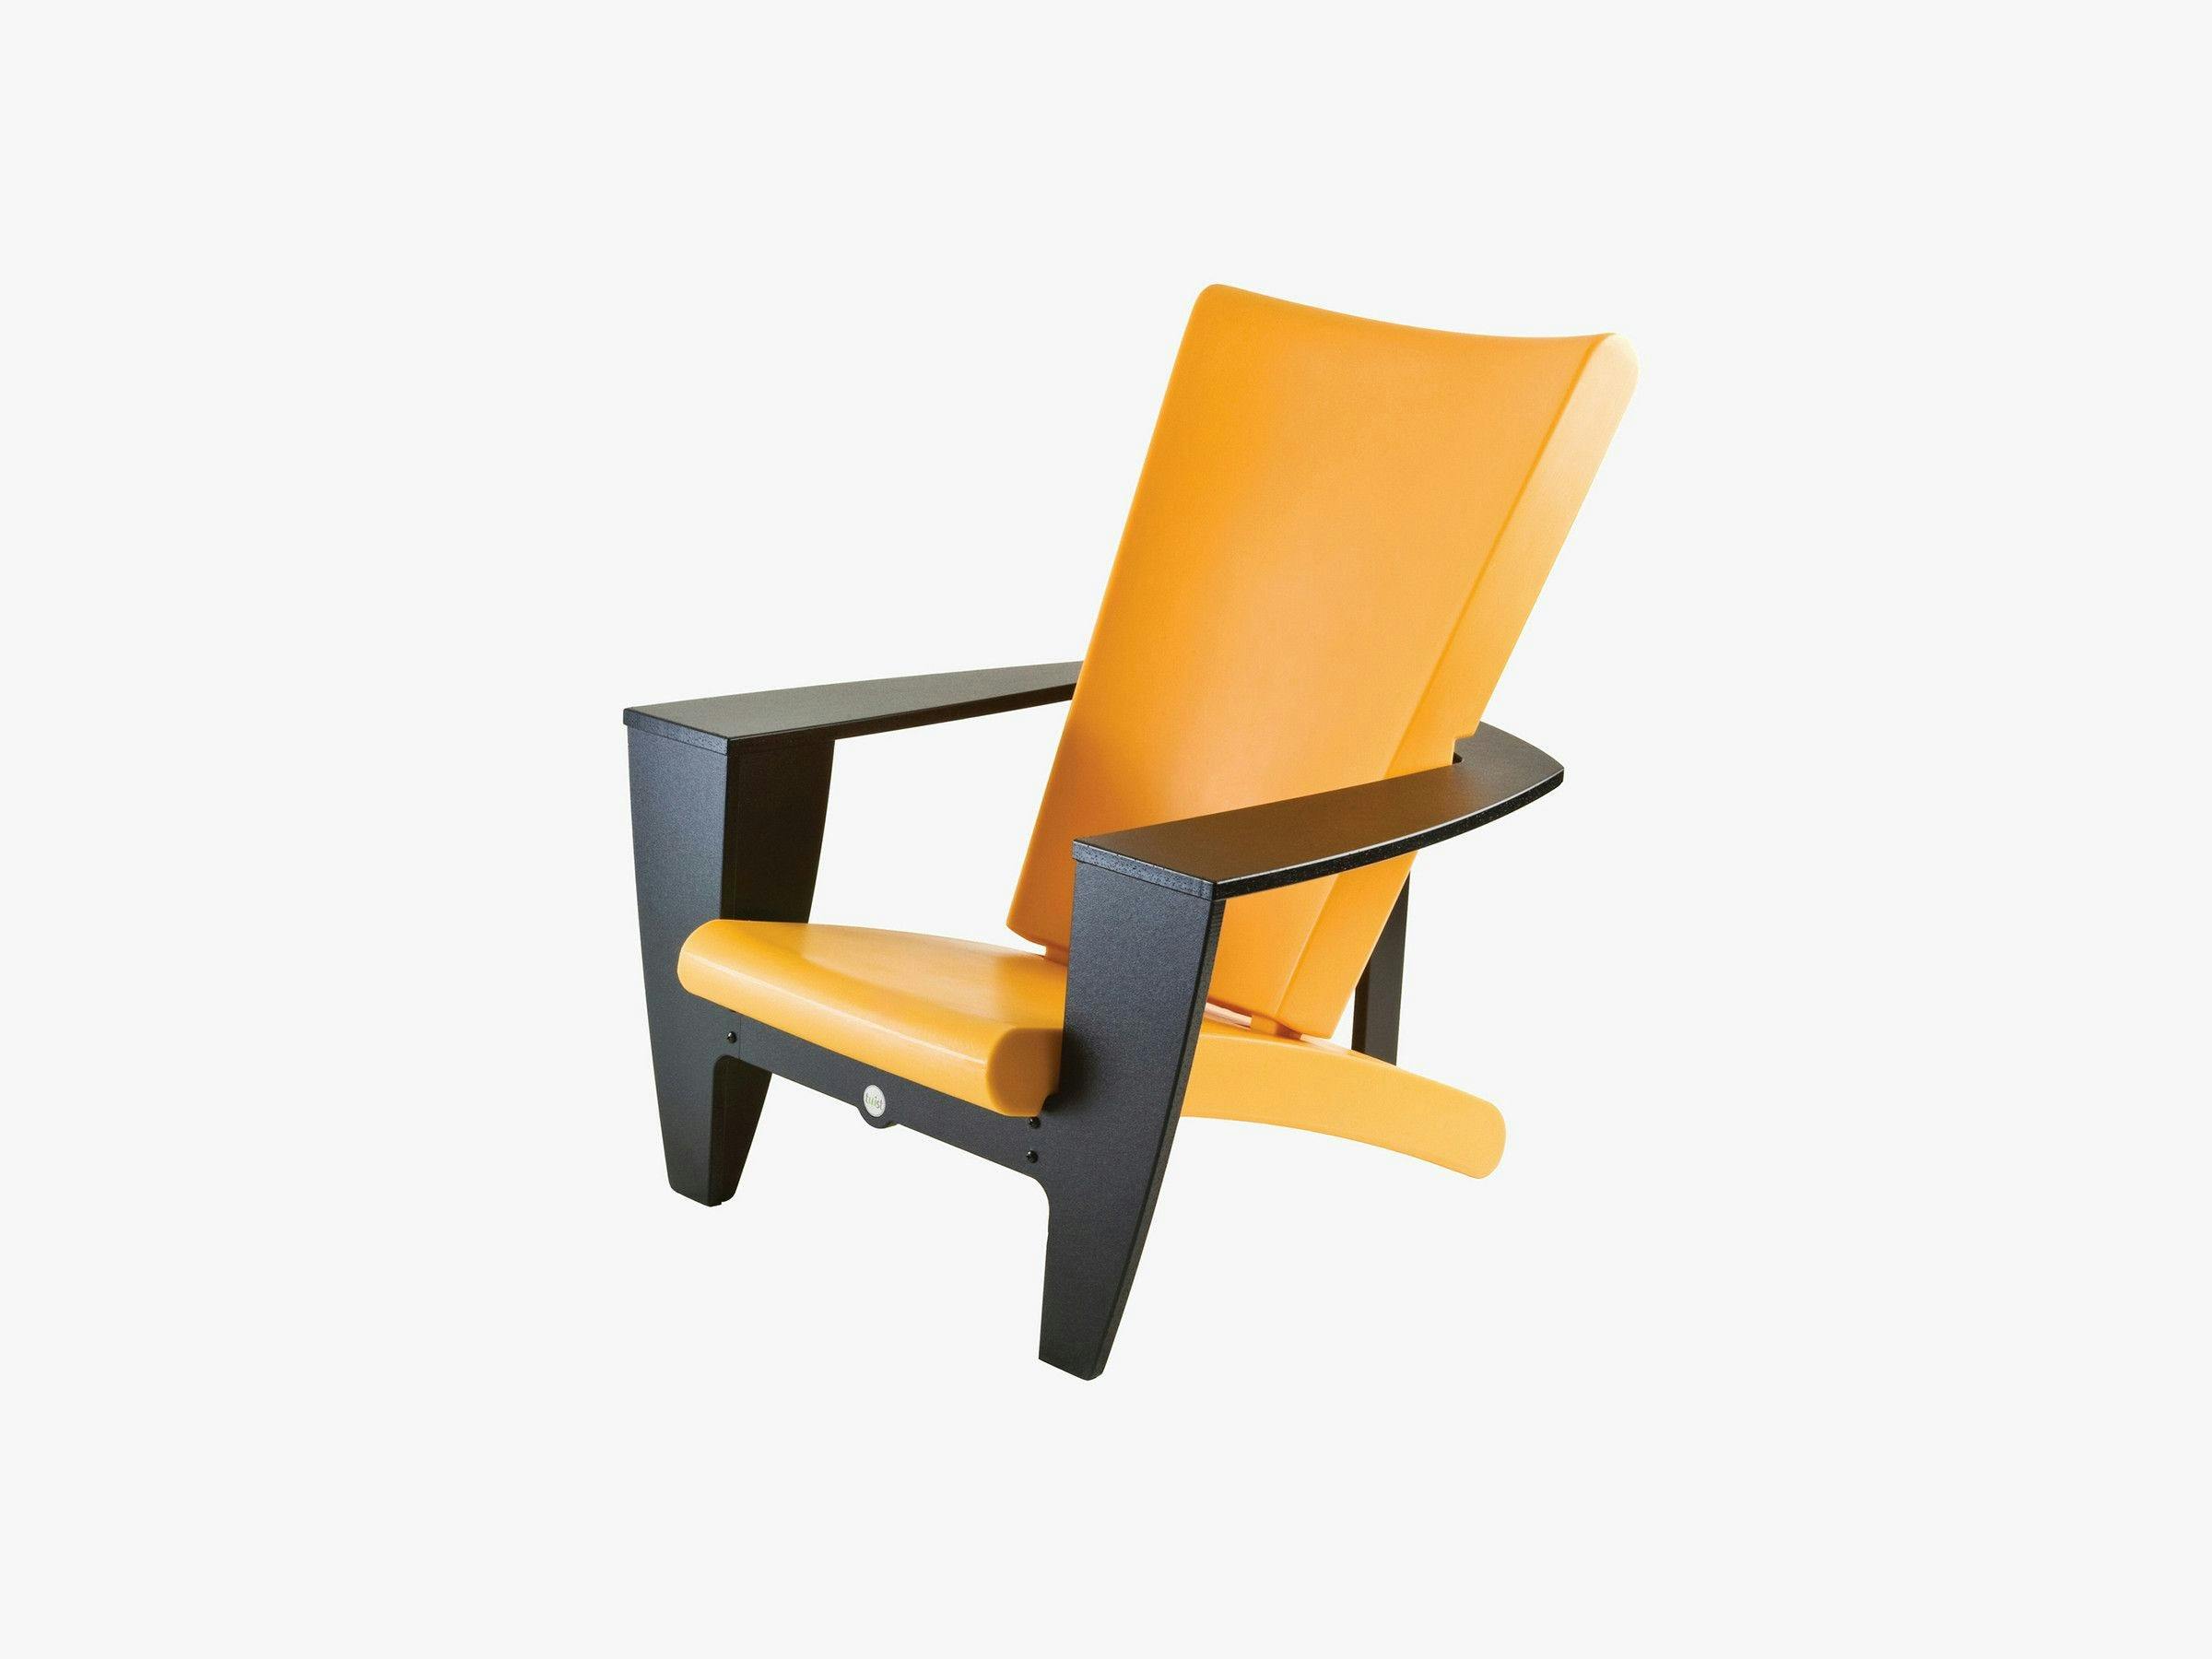 COZI Lounge Chair with black armrests/legs